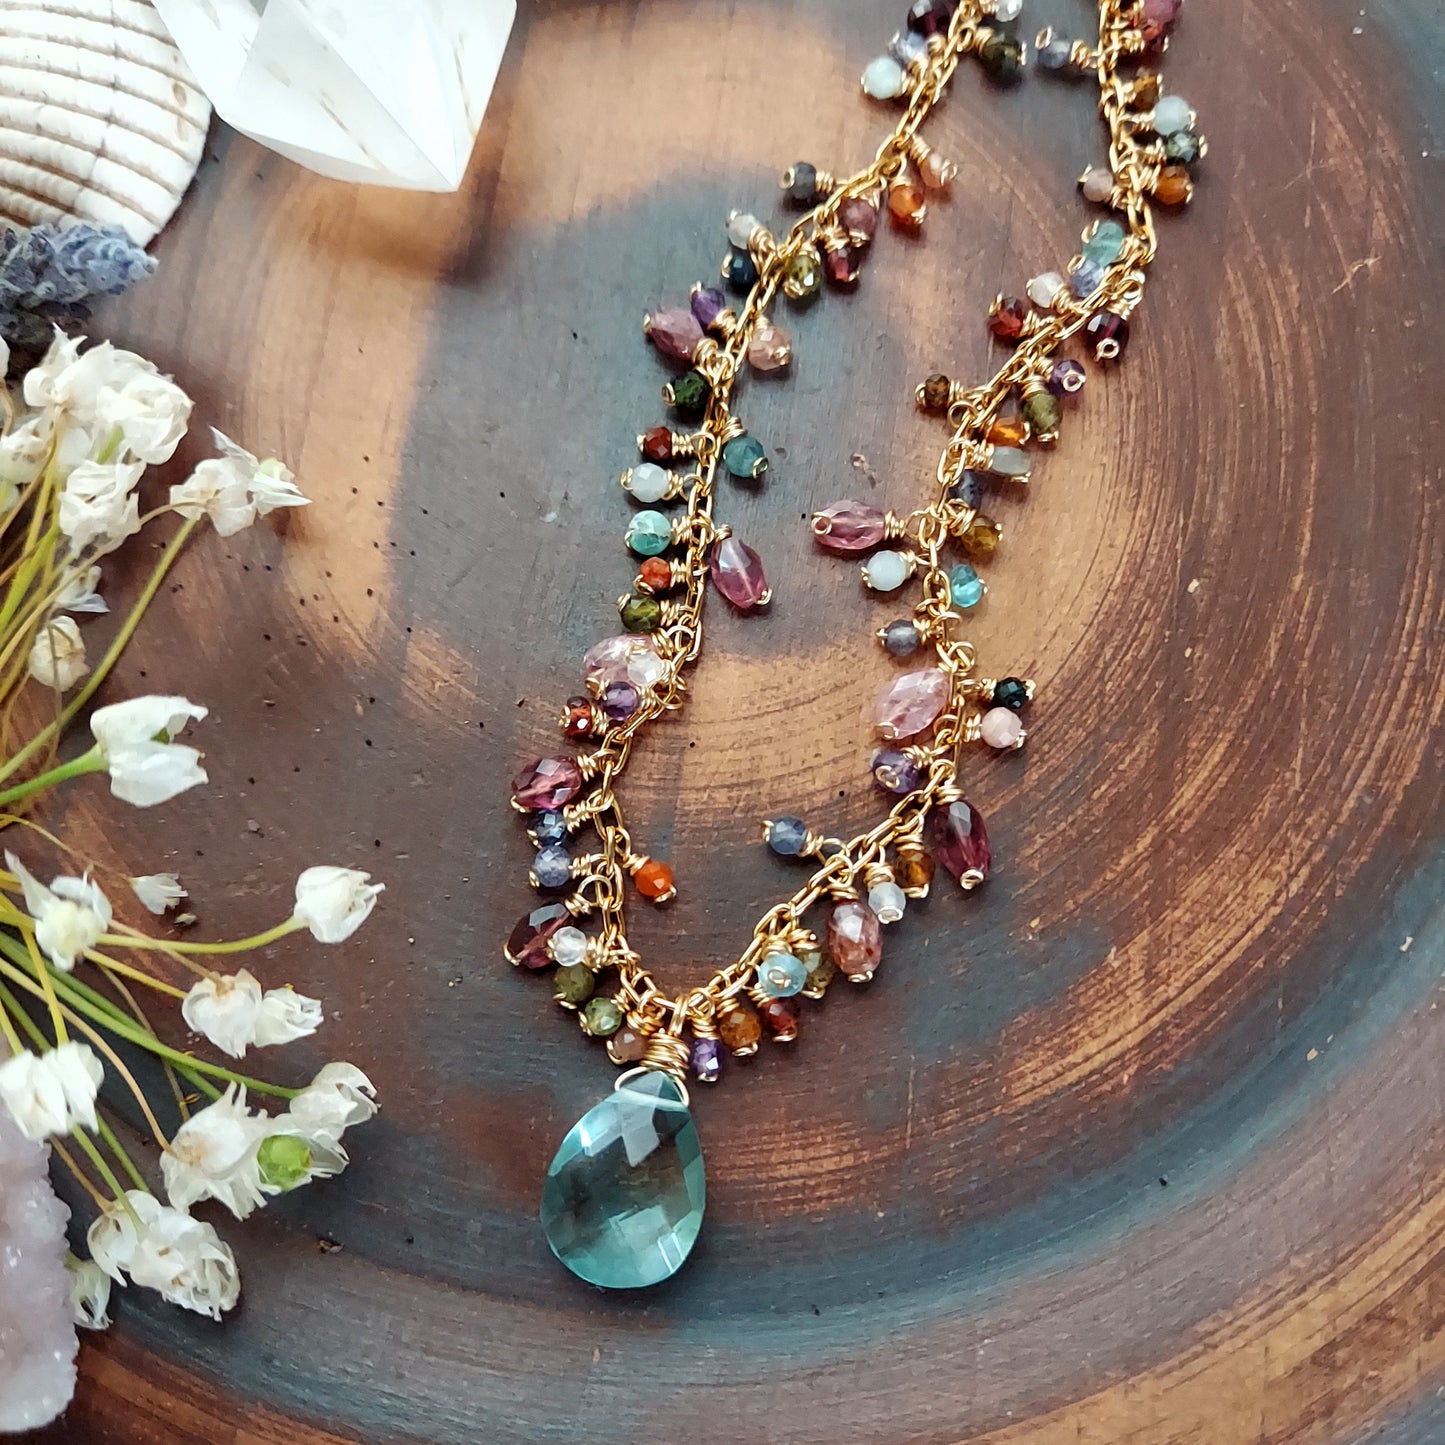 Luxurious Mixed Gemstone Necklace with Green Amethyst